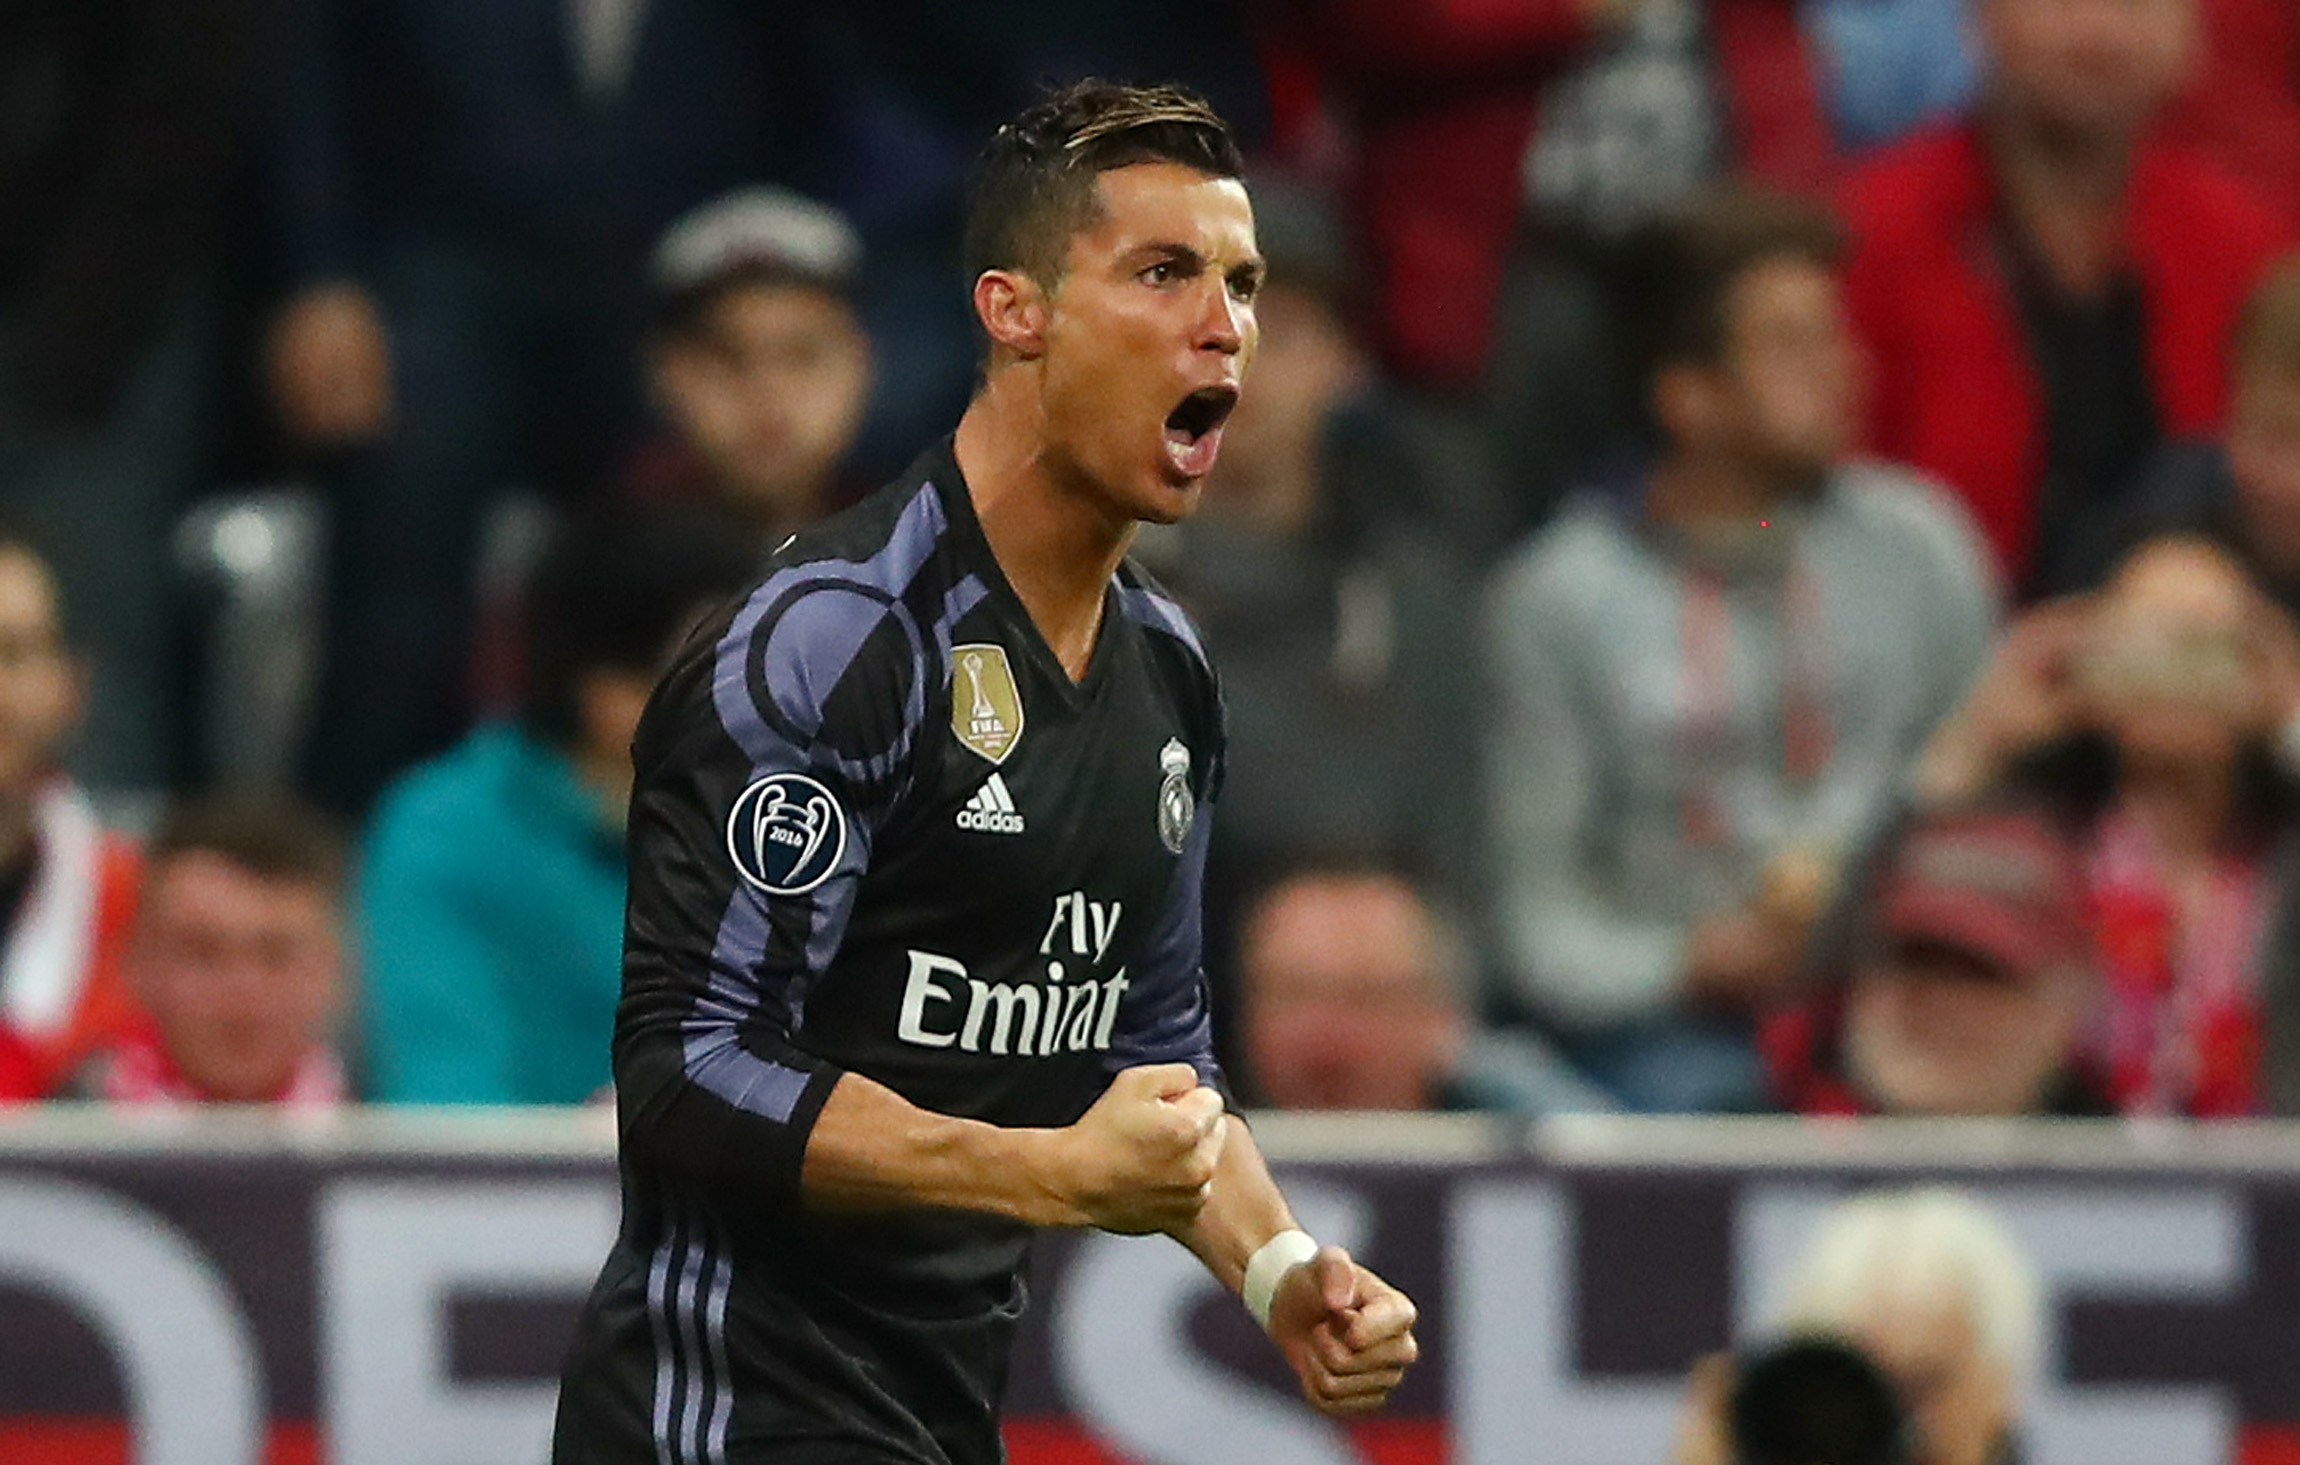 real madrid 039 s cristiano ronaldo celebrates scoring their first goal against bayern munich on april 12 2017 photo reuters